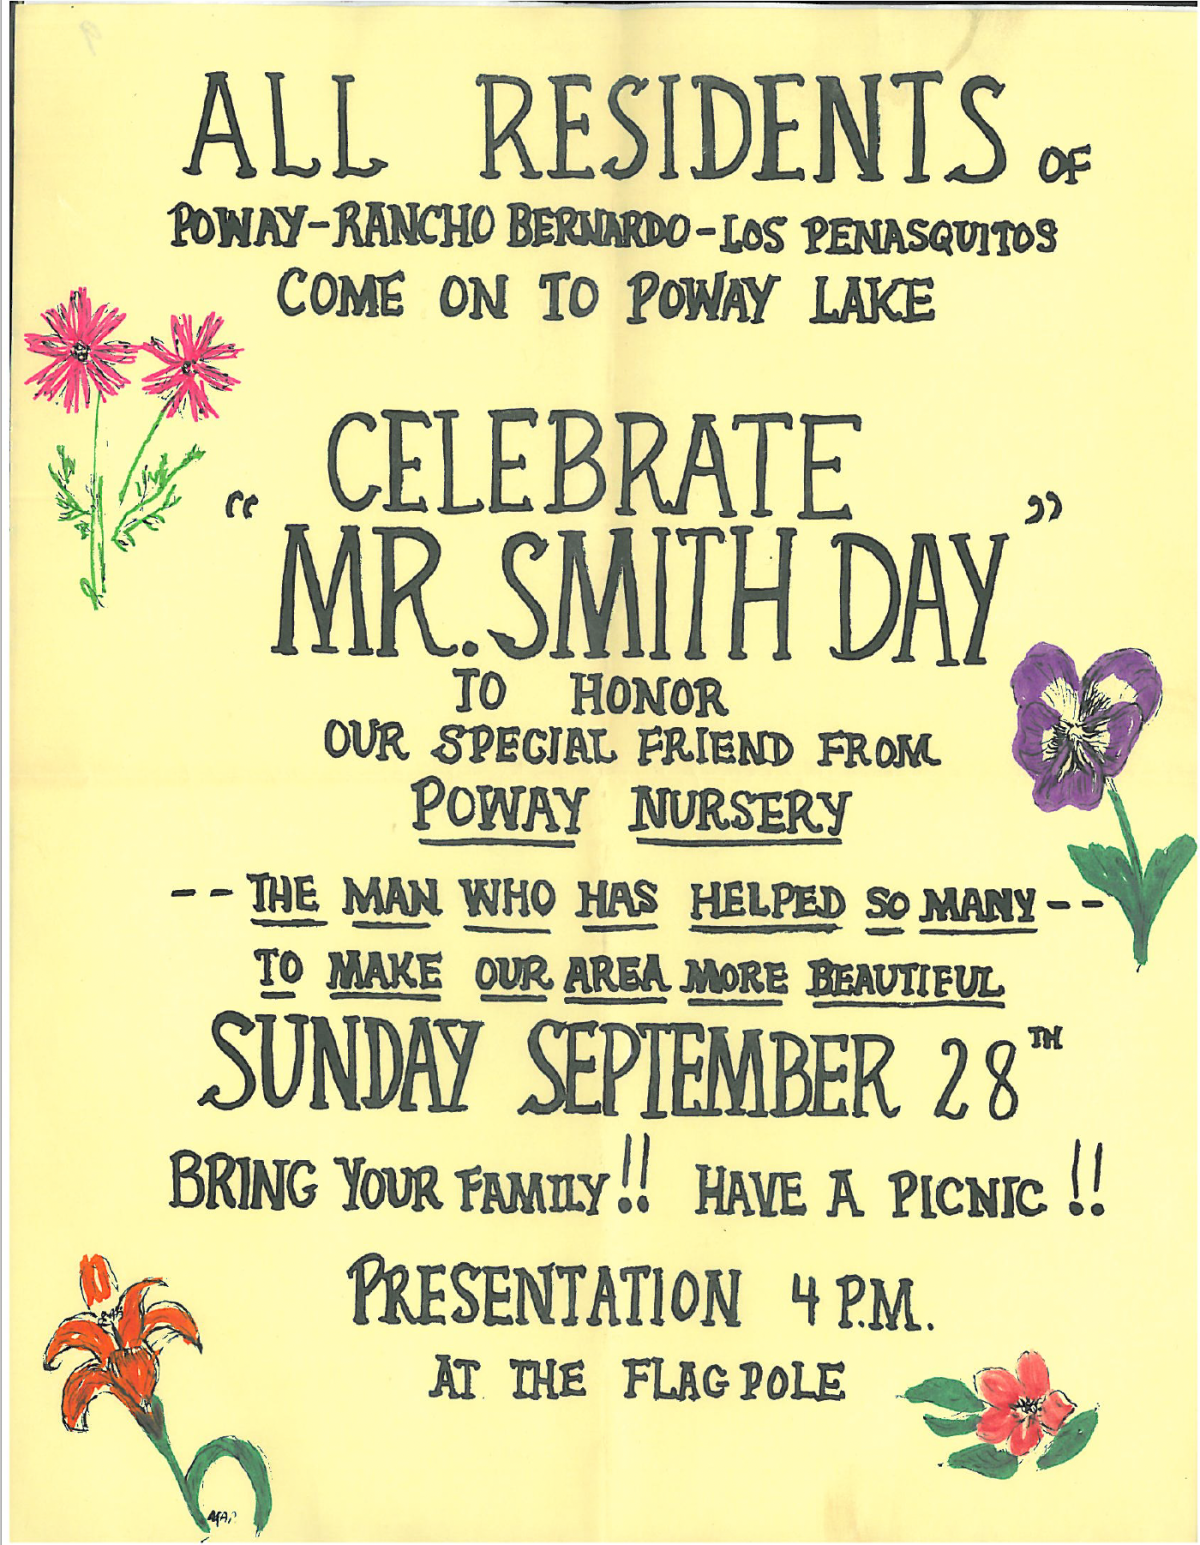 In the fall of 1975, a big crowd gathered at Lake Poway to honor Lawrence Smith, known as Mr. Smith. 